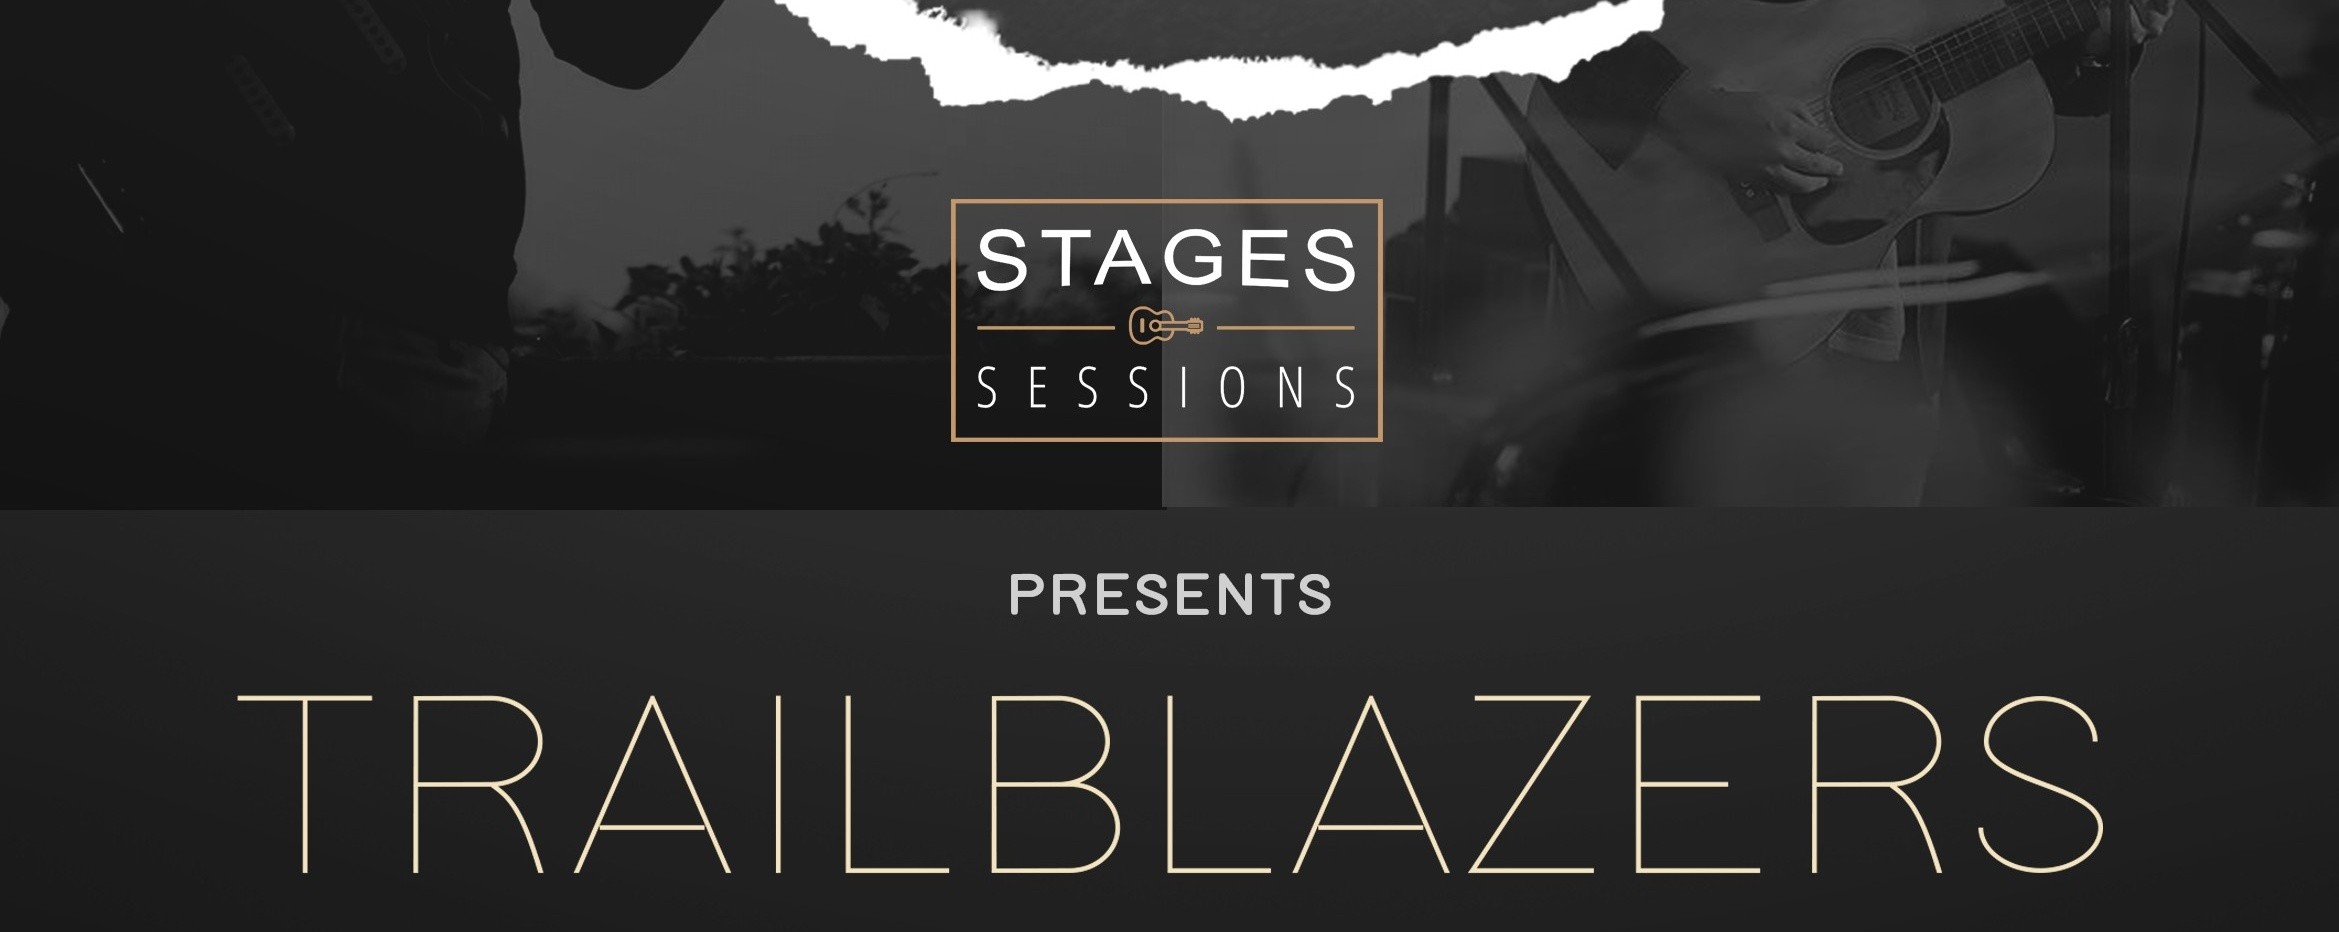 Stages Sessions presents Trailblazers